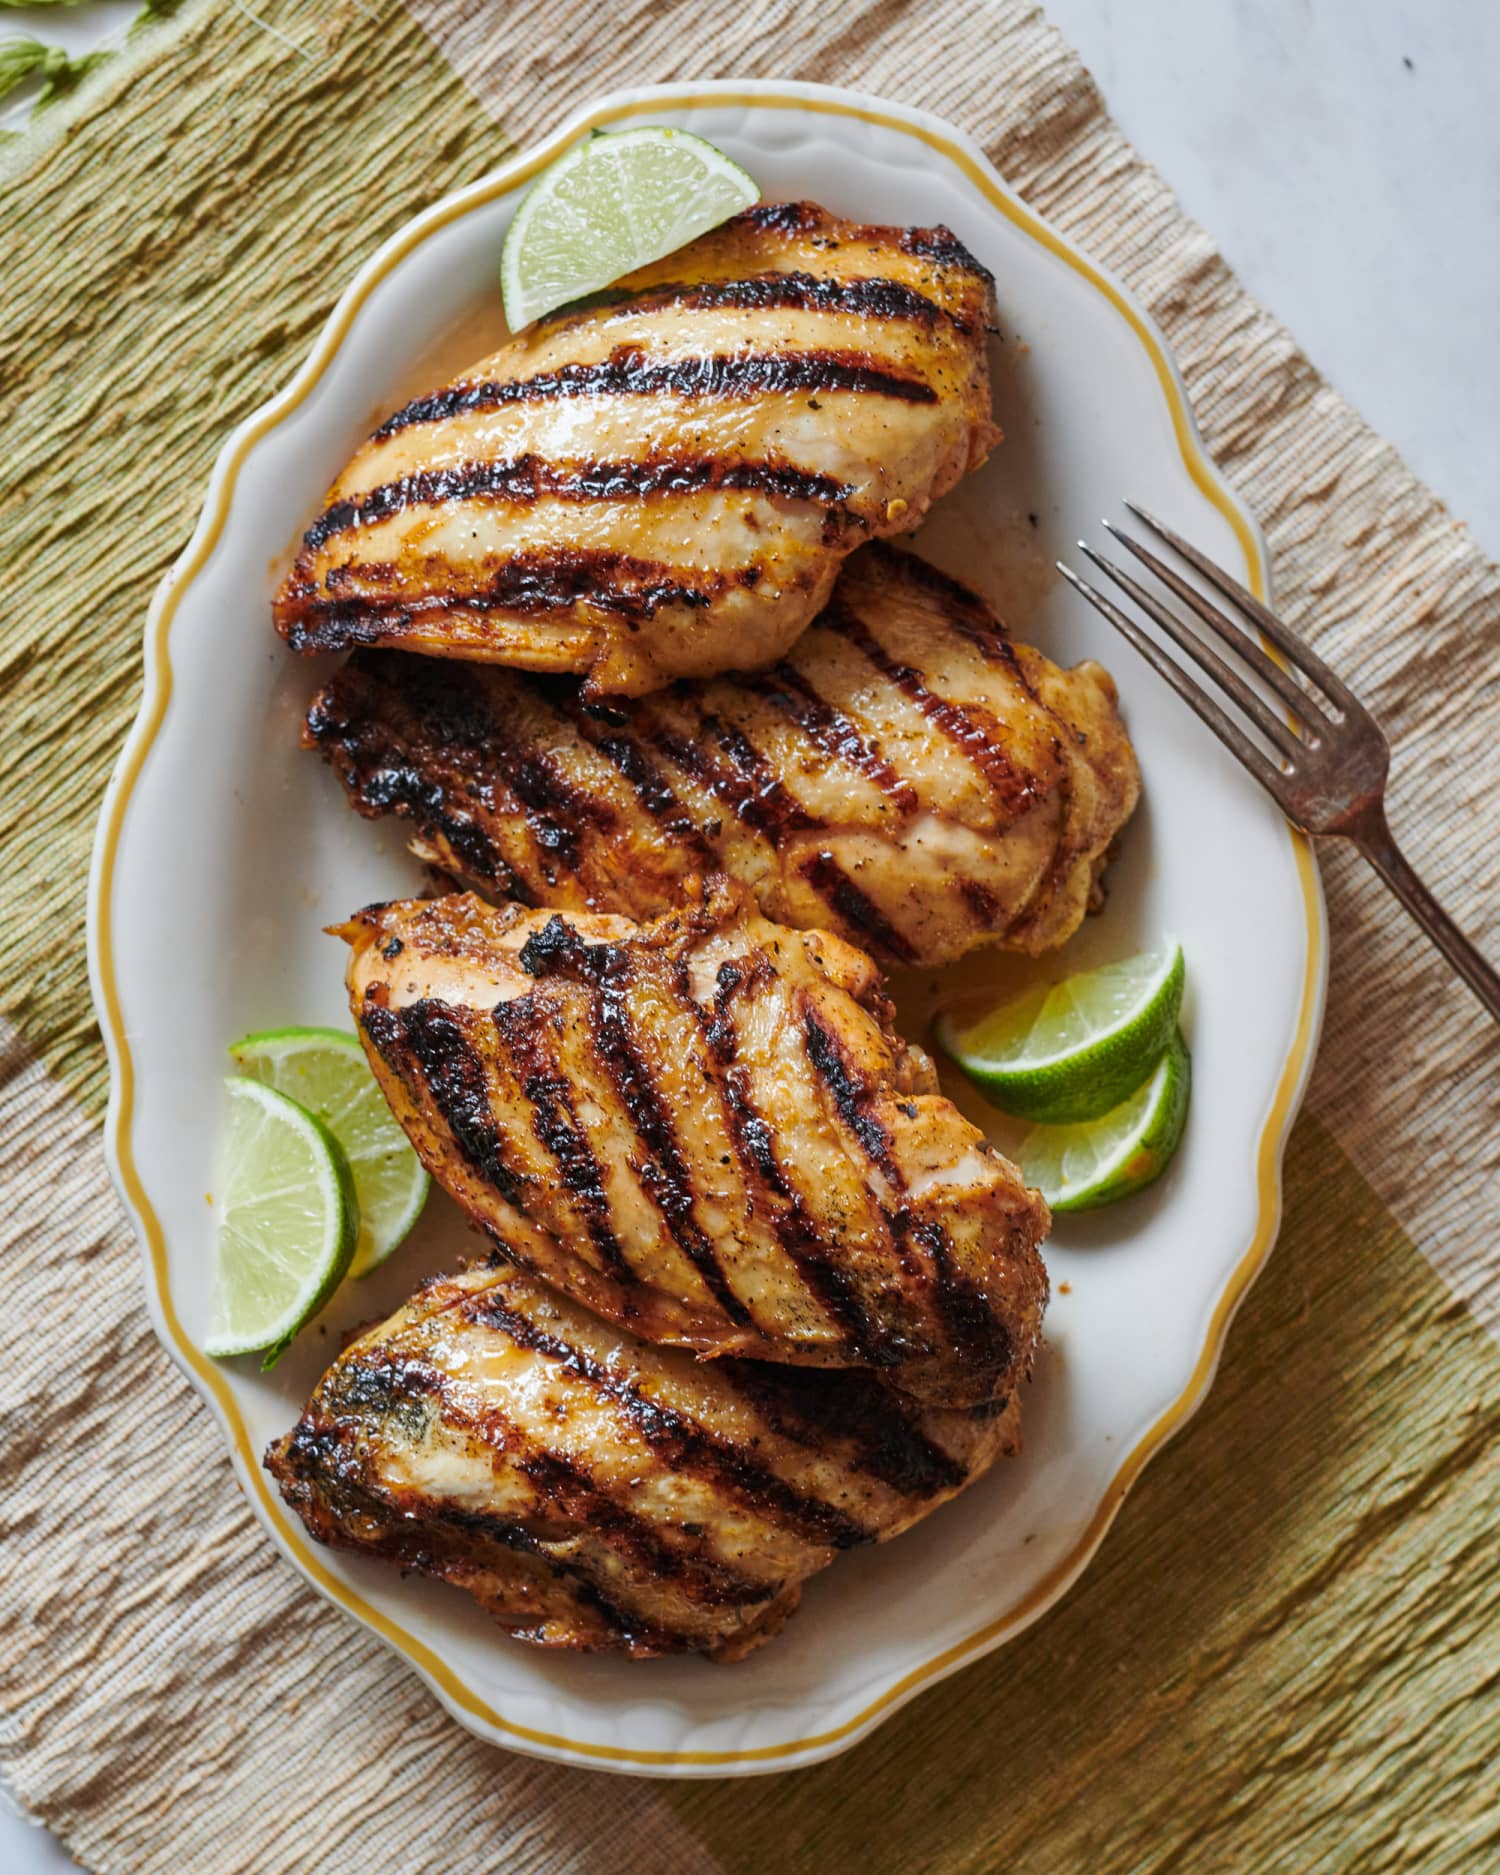 Tequila-Lime Chicken Will Have Everyone Asking for the Recipe